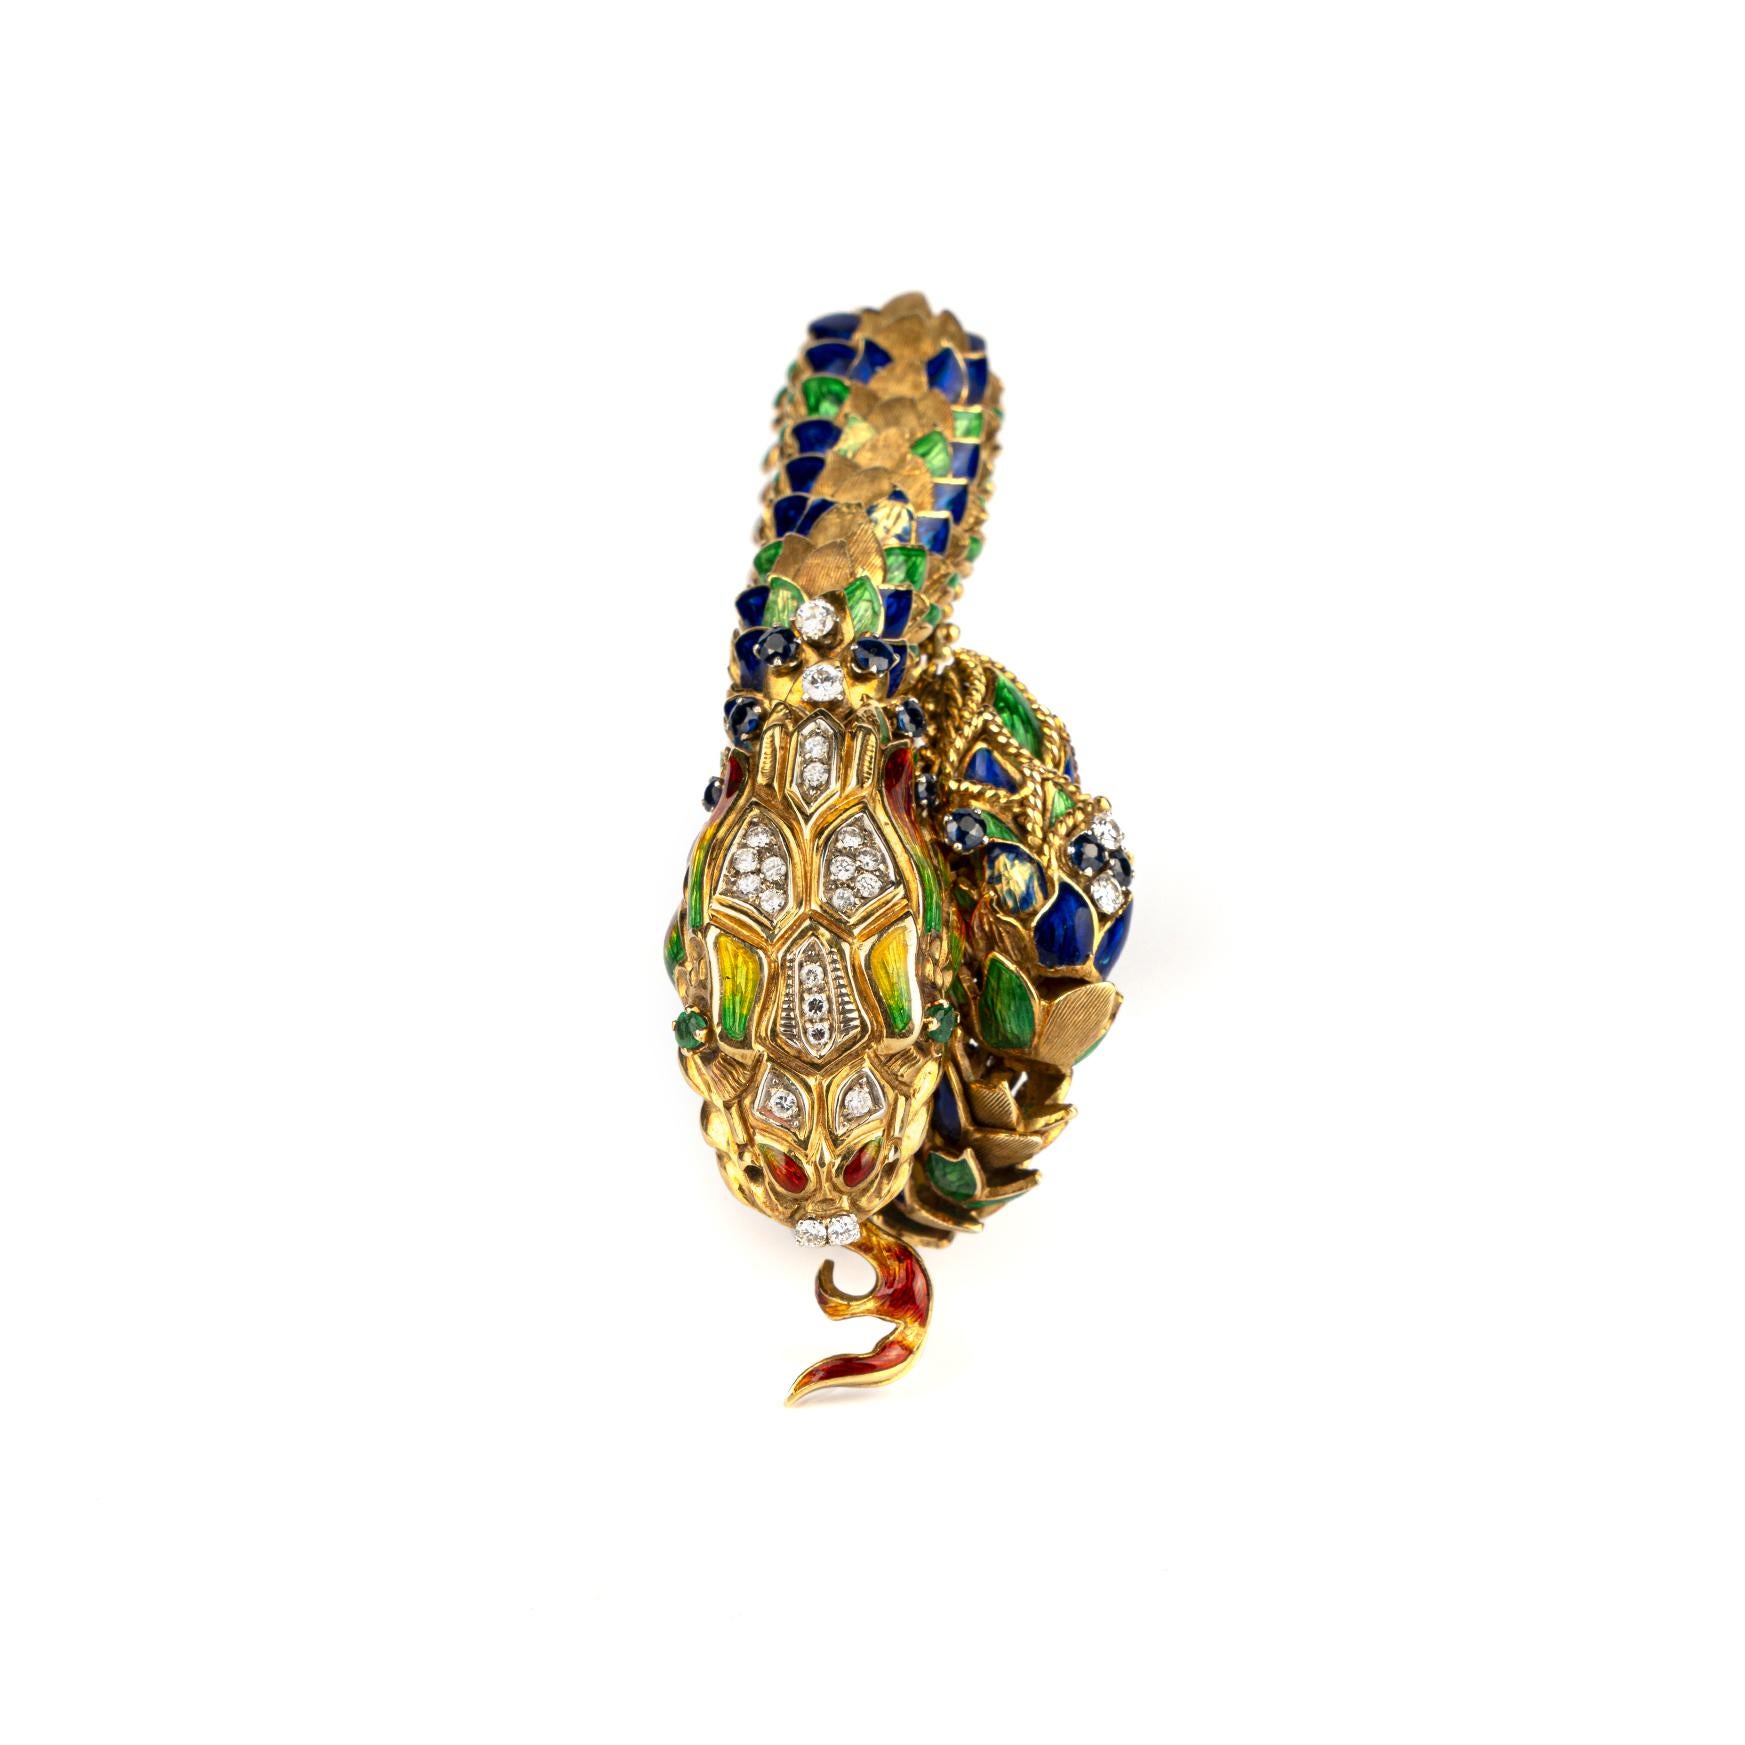 A refined Serpent Bracelet mounted on 18k yellow gold with fine multicolor guilloché enameling and diamonds. Made in Italy, circa 1960.